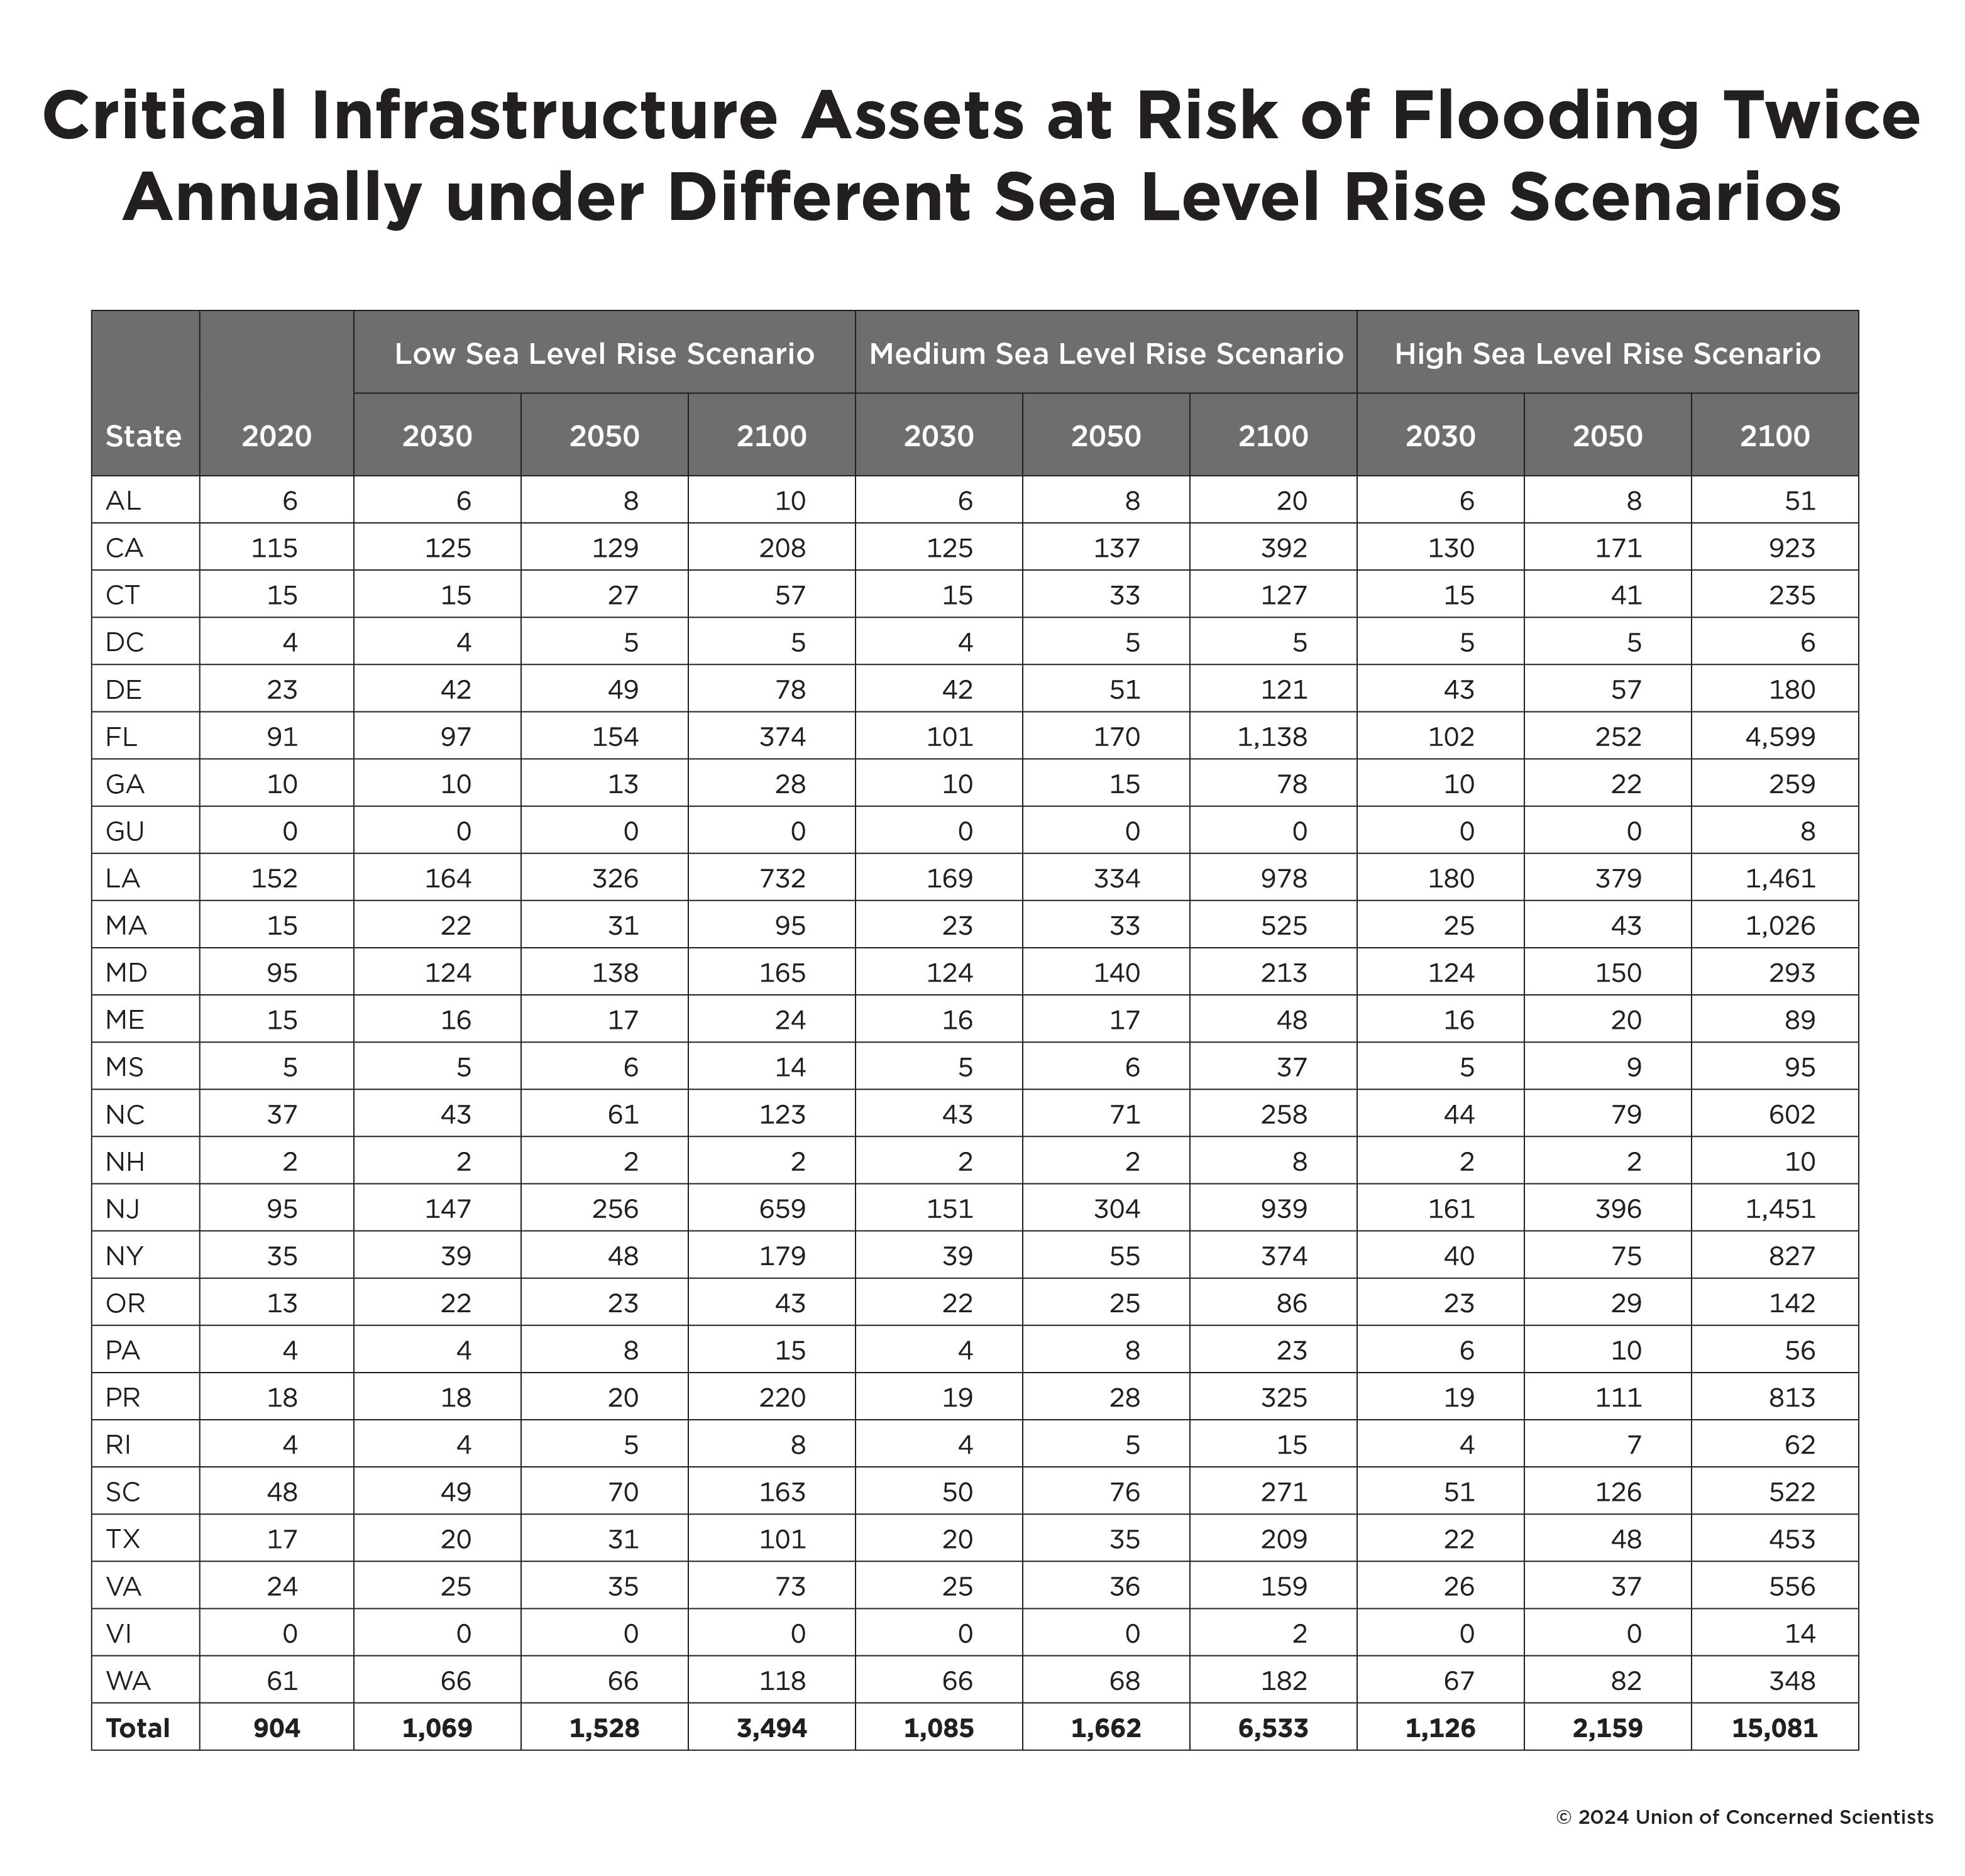 Table showing critical infrastructure assets at risk of flooding twice a year